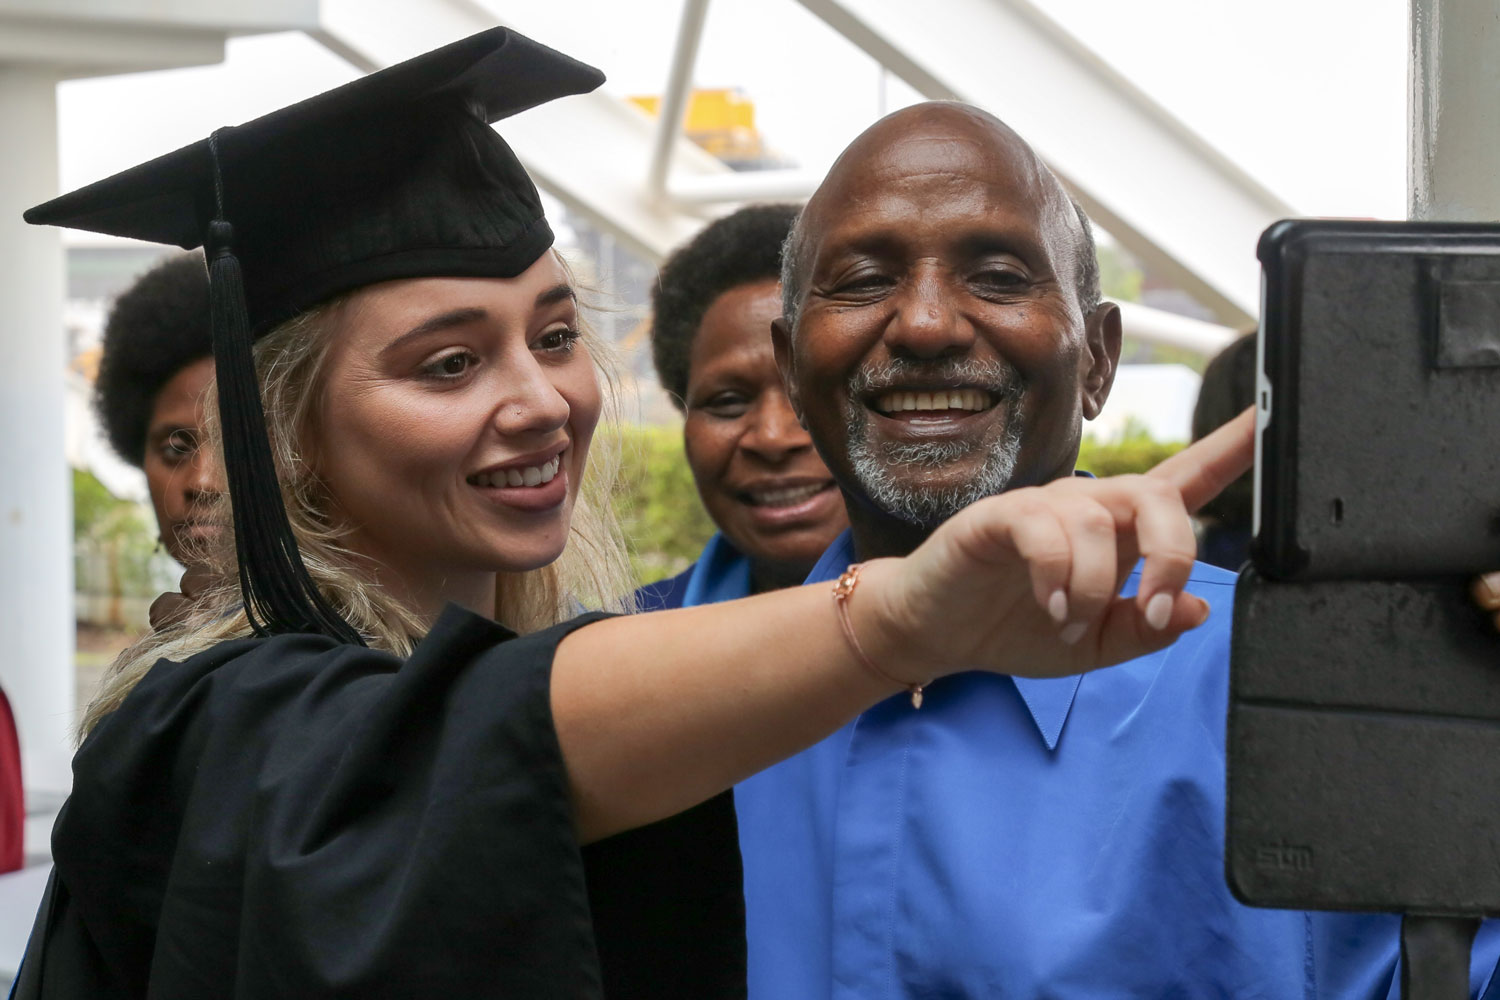 A graduand takes a selfie with one of her guests